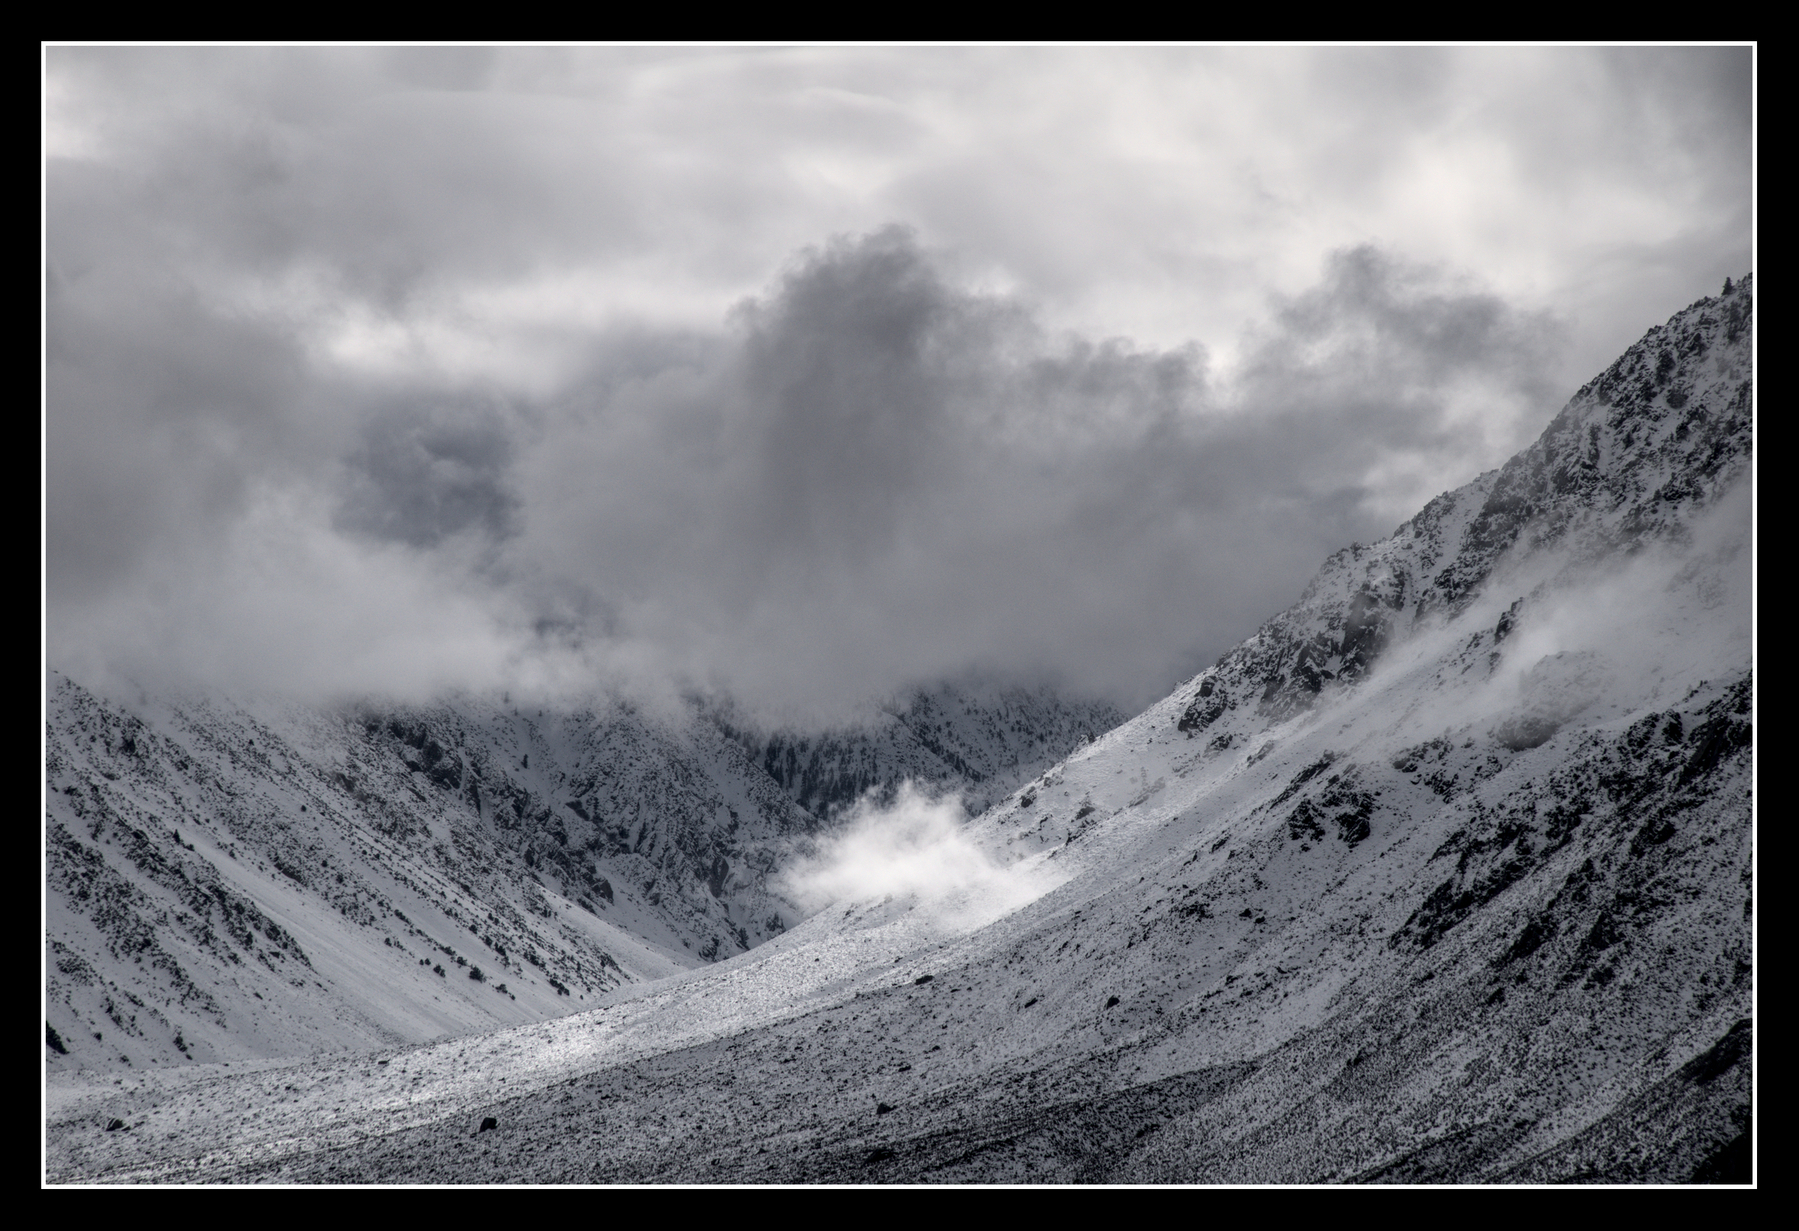 A deep. sharp mountain canyon is covered with snow. Clouds cover the tops of the mountains, but one little cloud rests on the canyon wall, apart from the rest, and lit by a ray of sunlight.